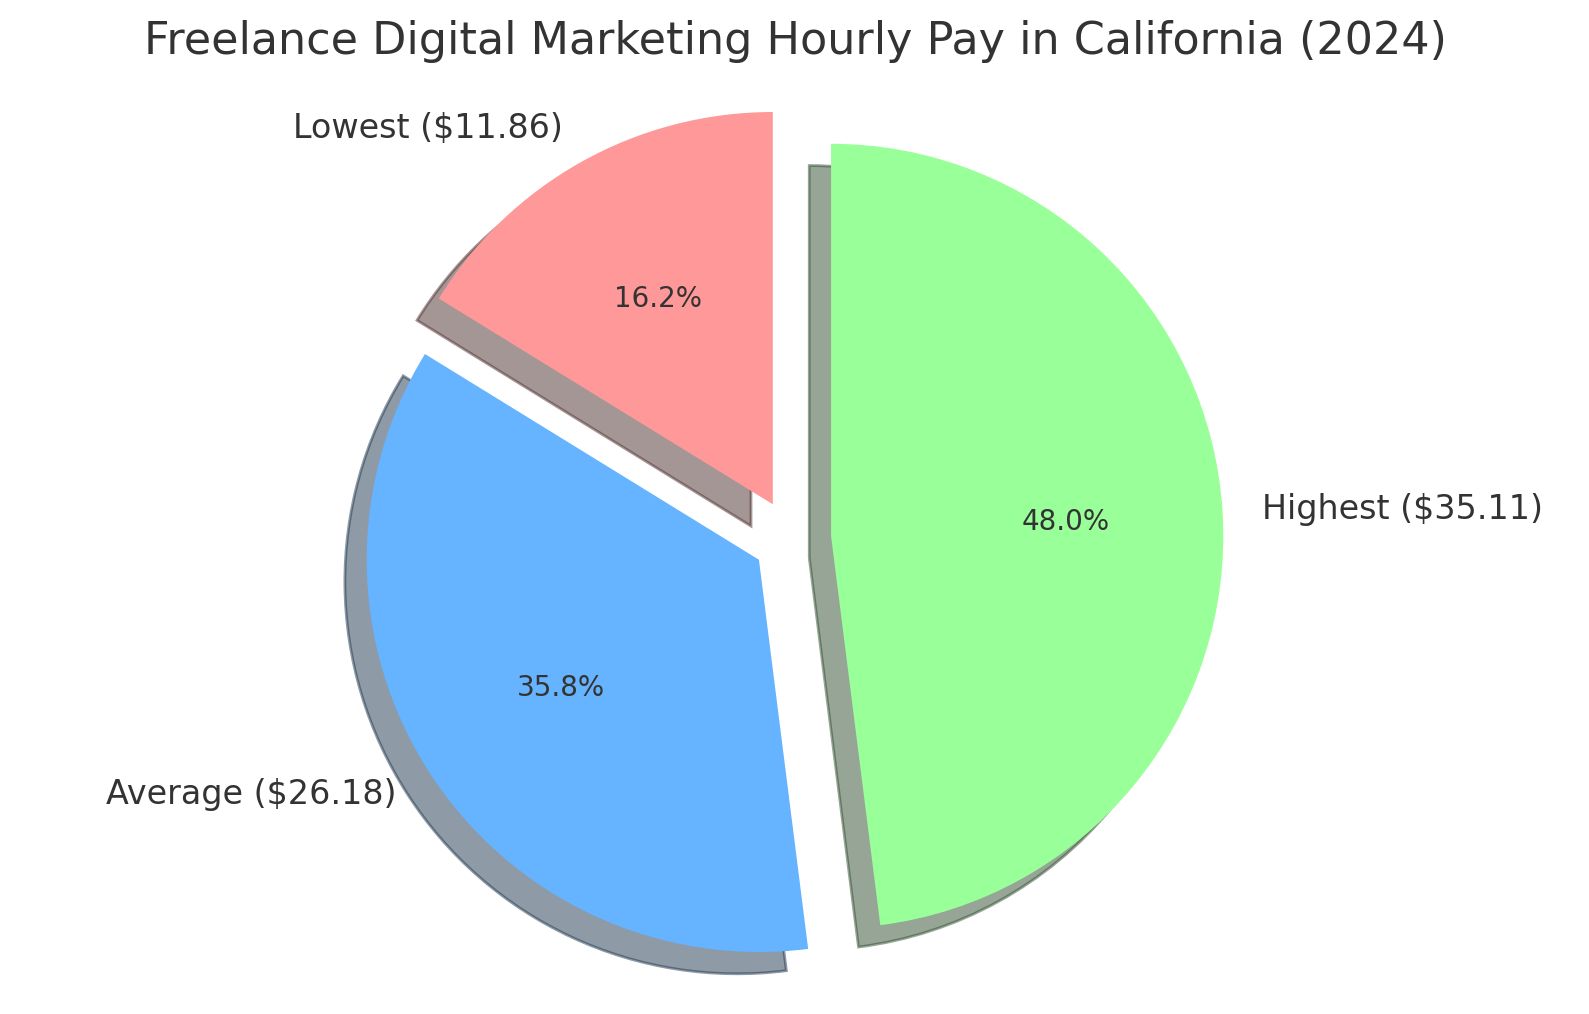 A pie chart showing freelance digital marketing hourly pay in california